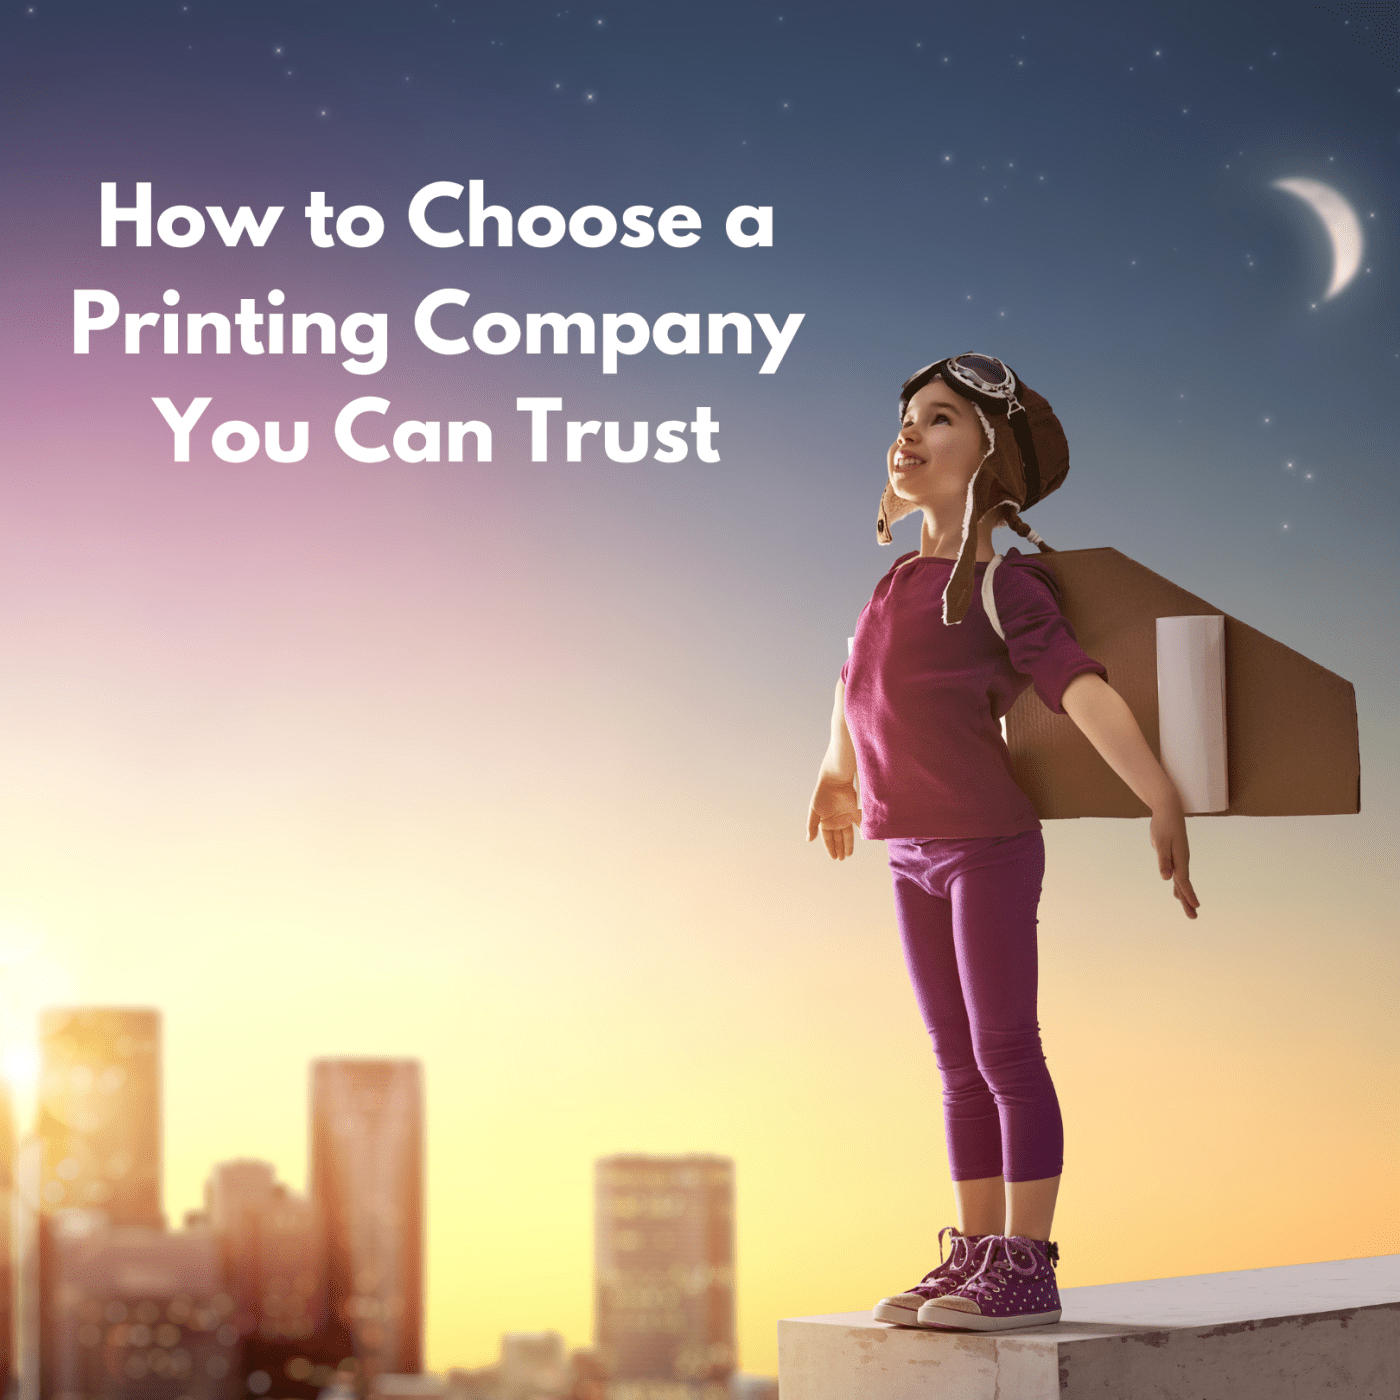 Best Quality T-Shirt Printing: How to Choose a Printing Company You Can Trust, custom t-shirts, t-shirt printing, custom t shirts, t shirt printing, best quality t-shirt printing.